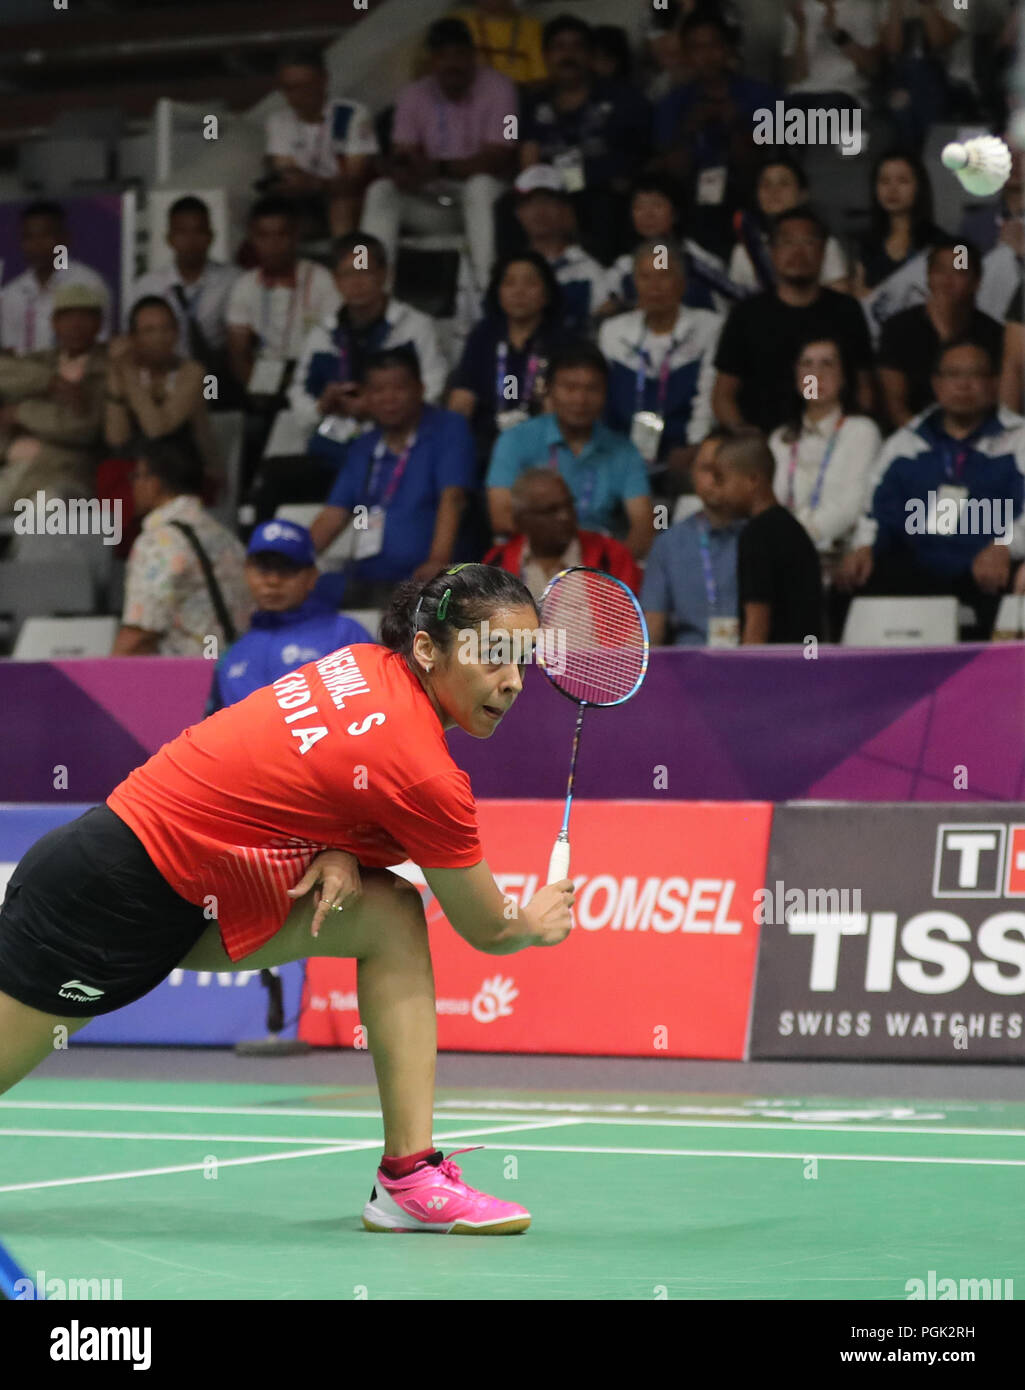 Jakarta, Indonesia, 27th Aug 2018 Badminton Semifinals Indias Saina Nehwal settled for bronze after going down to Taiwans Tai Tzu Ying 21-17, 21-14 in the semi-finals of the womens singles event in